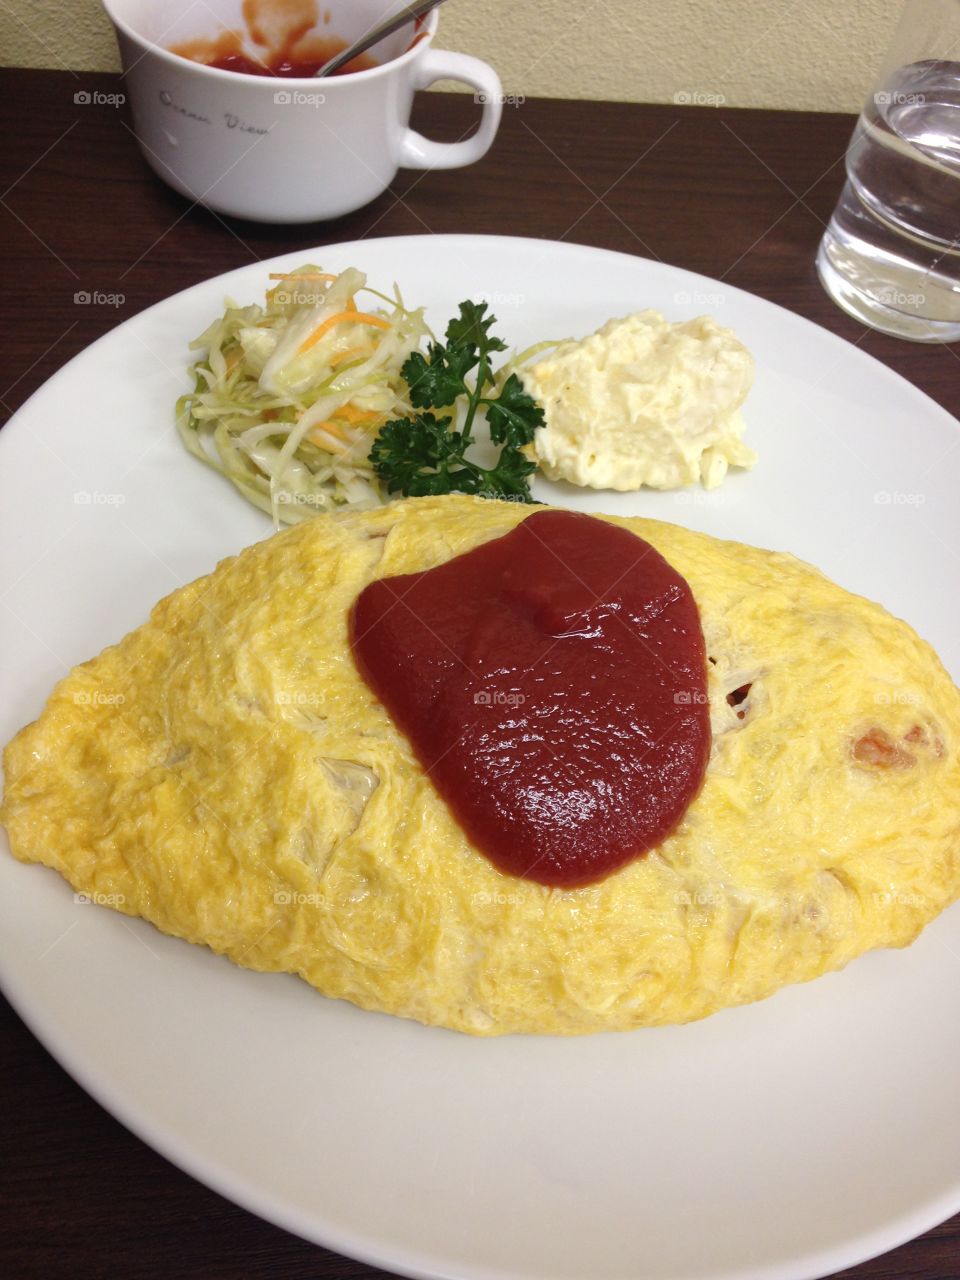 Stir-fried rice wrapped in an omelet♡It’s called Omurice♡